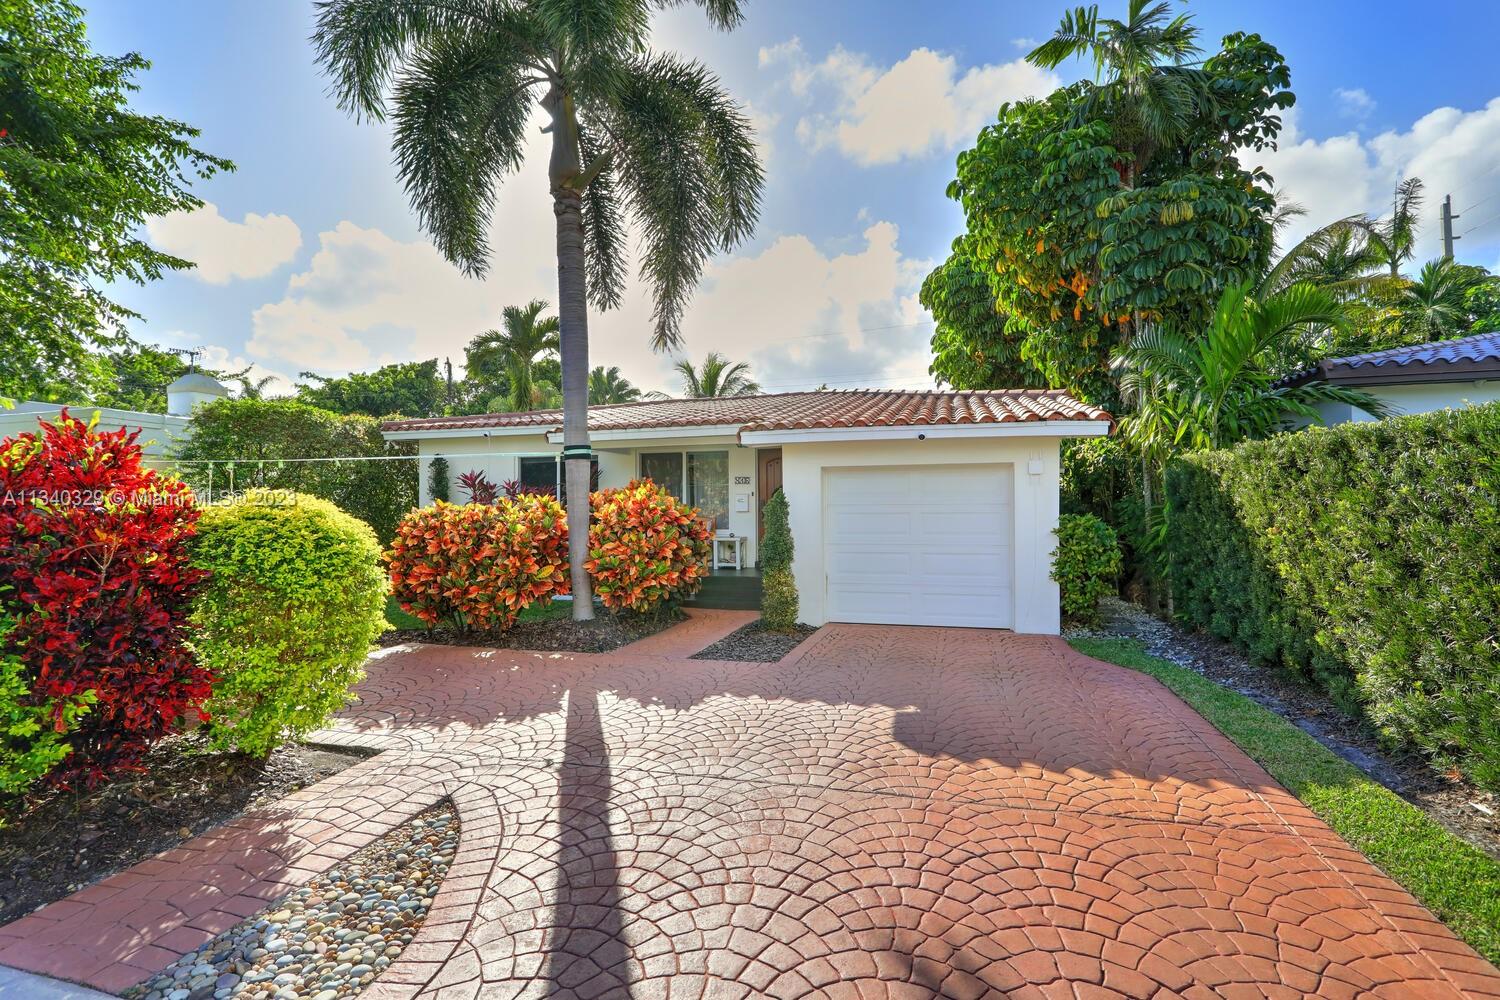 This stunning home in Coral Gables has undergone a modern renovation, making it an ideal choice for discerning buyers. The property includes 3 bedrooms & 2 bathrooms, & is located on a peaceful cul-de-sac. The interior features a recently updated kitchen & bathrooms, as well as hardwood & tile floors, hurricane impact windows, & a 2022 Trane A/C unit equipped with smart sensors, controls & UV light air purifier. In addition to a new electrical panel & tankless water heater, the home comes with brand new appliances, including a washer & dryer. The property's beautiful landscaping in the front & back yards adds to the sophisticated appeal, with the backyard featuring a new pergola & outdoor deck fitted with smart lights, which expands the outdoor living space by an additional 700 sqft.